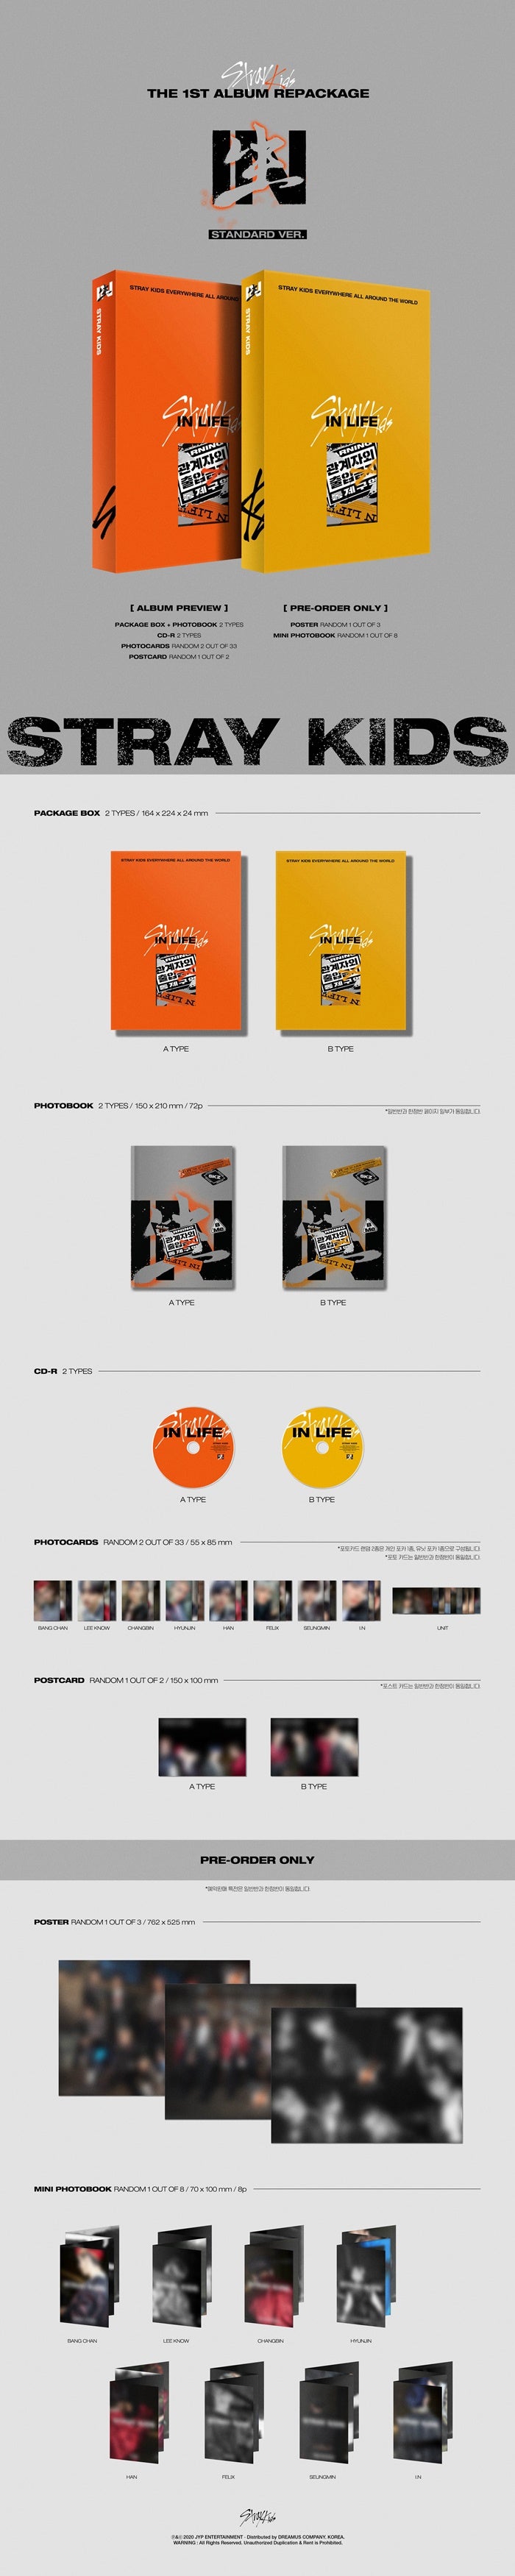 1 CD
1 Photobook (72 pages)
2 Photo Cards (random out of 33 types)
1 Postcard (random out of 2 types)